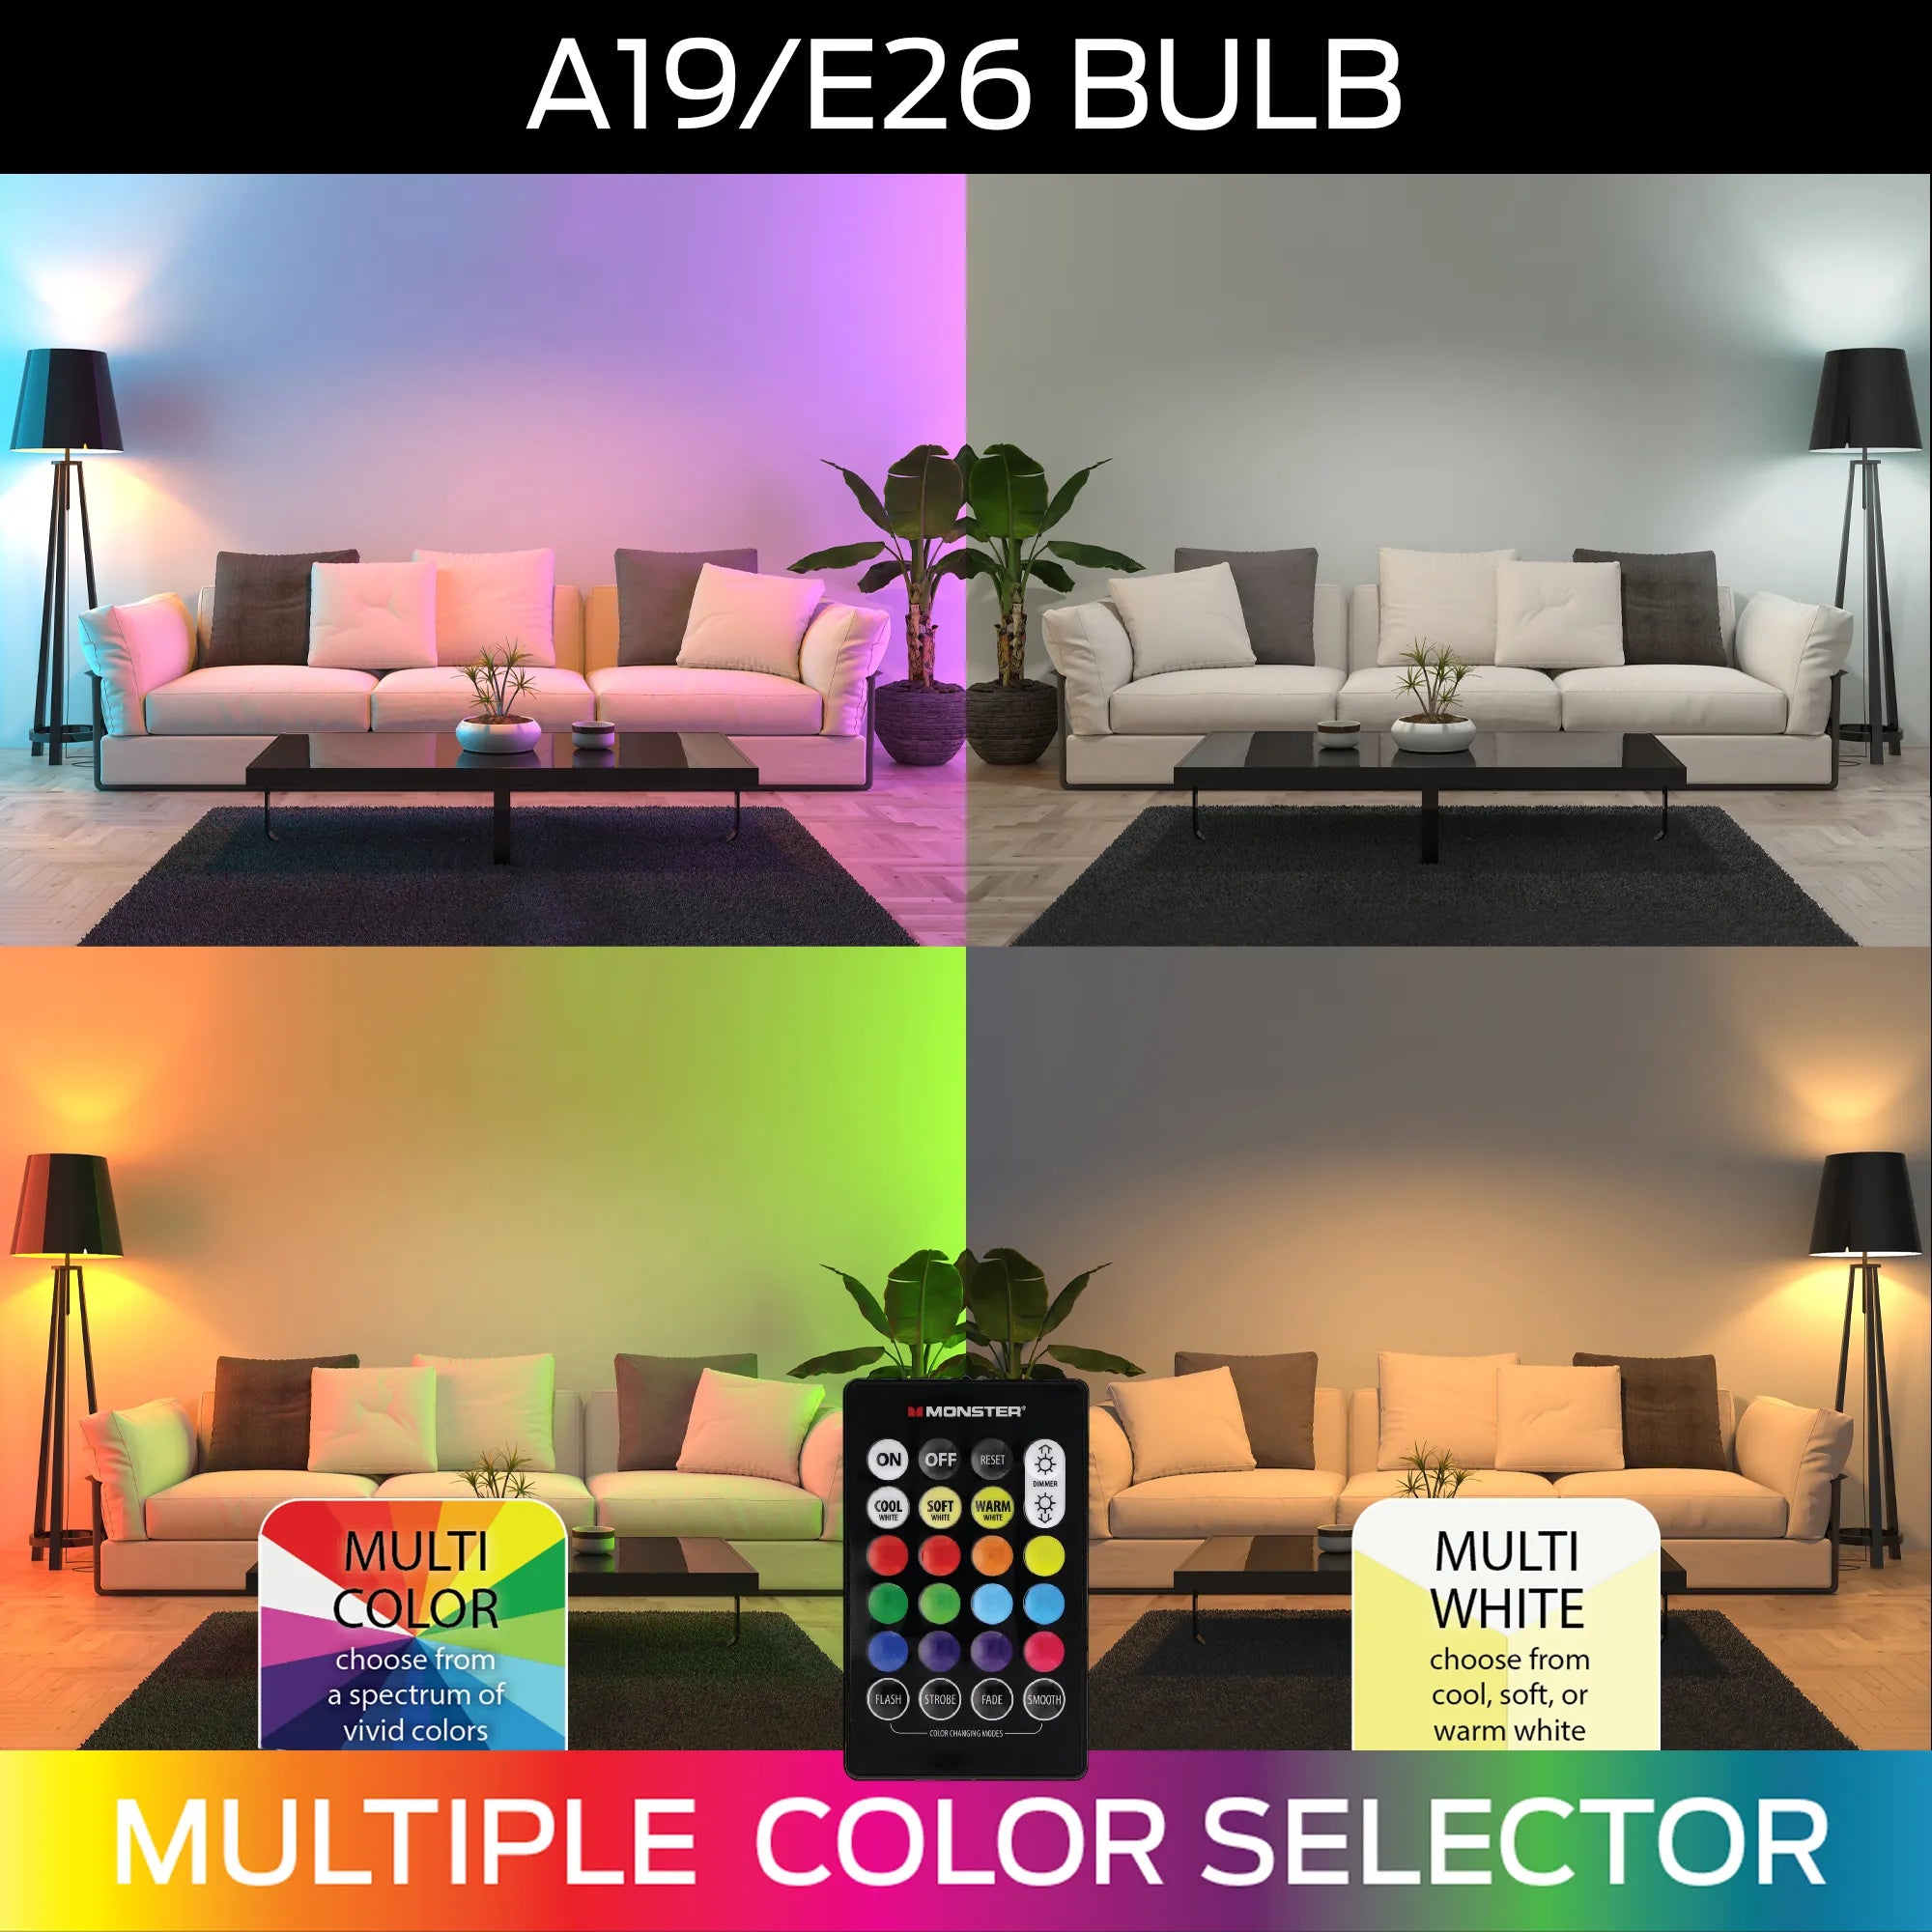 MONSTER Multi Color/ Multi White A19 LED Light Bulb with remote